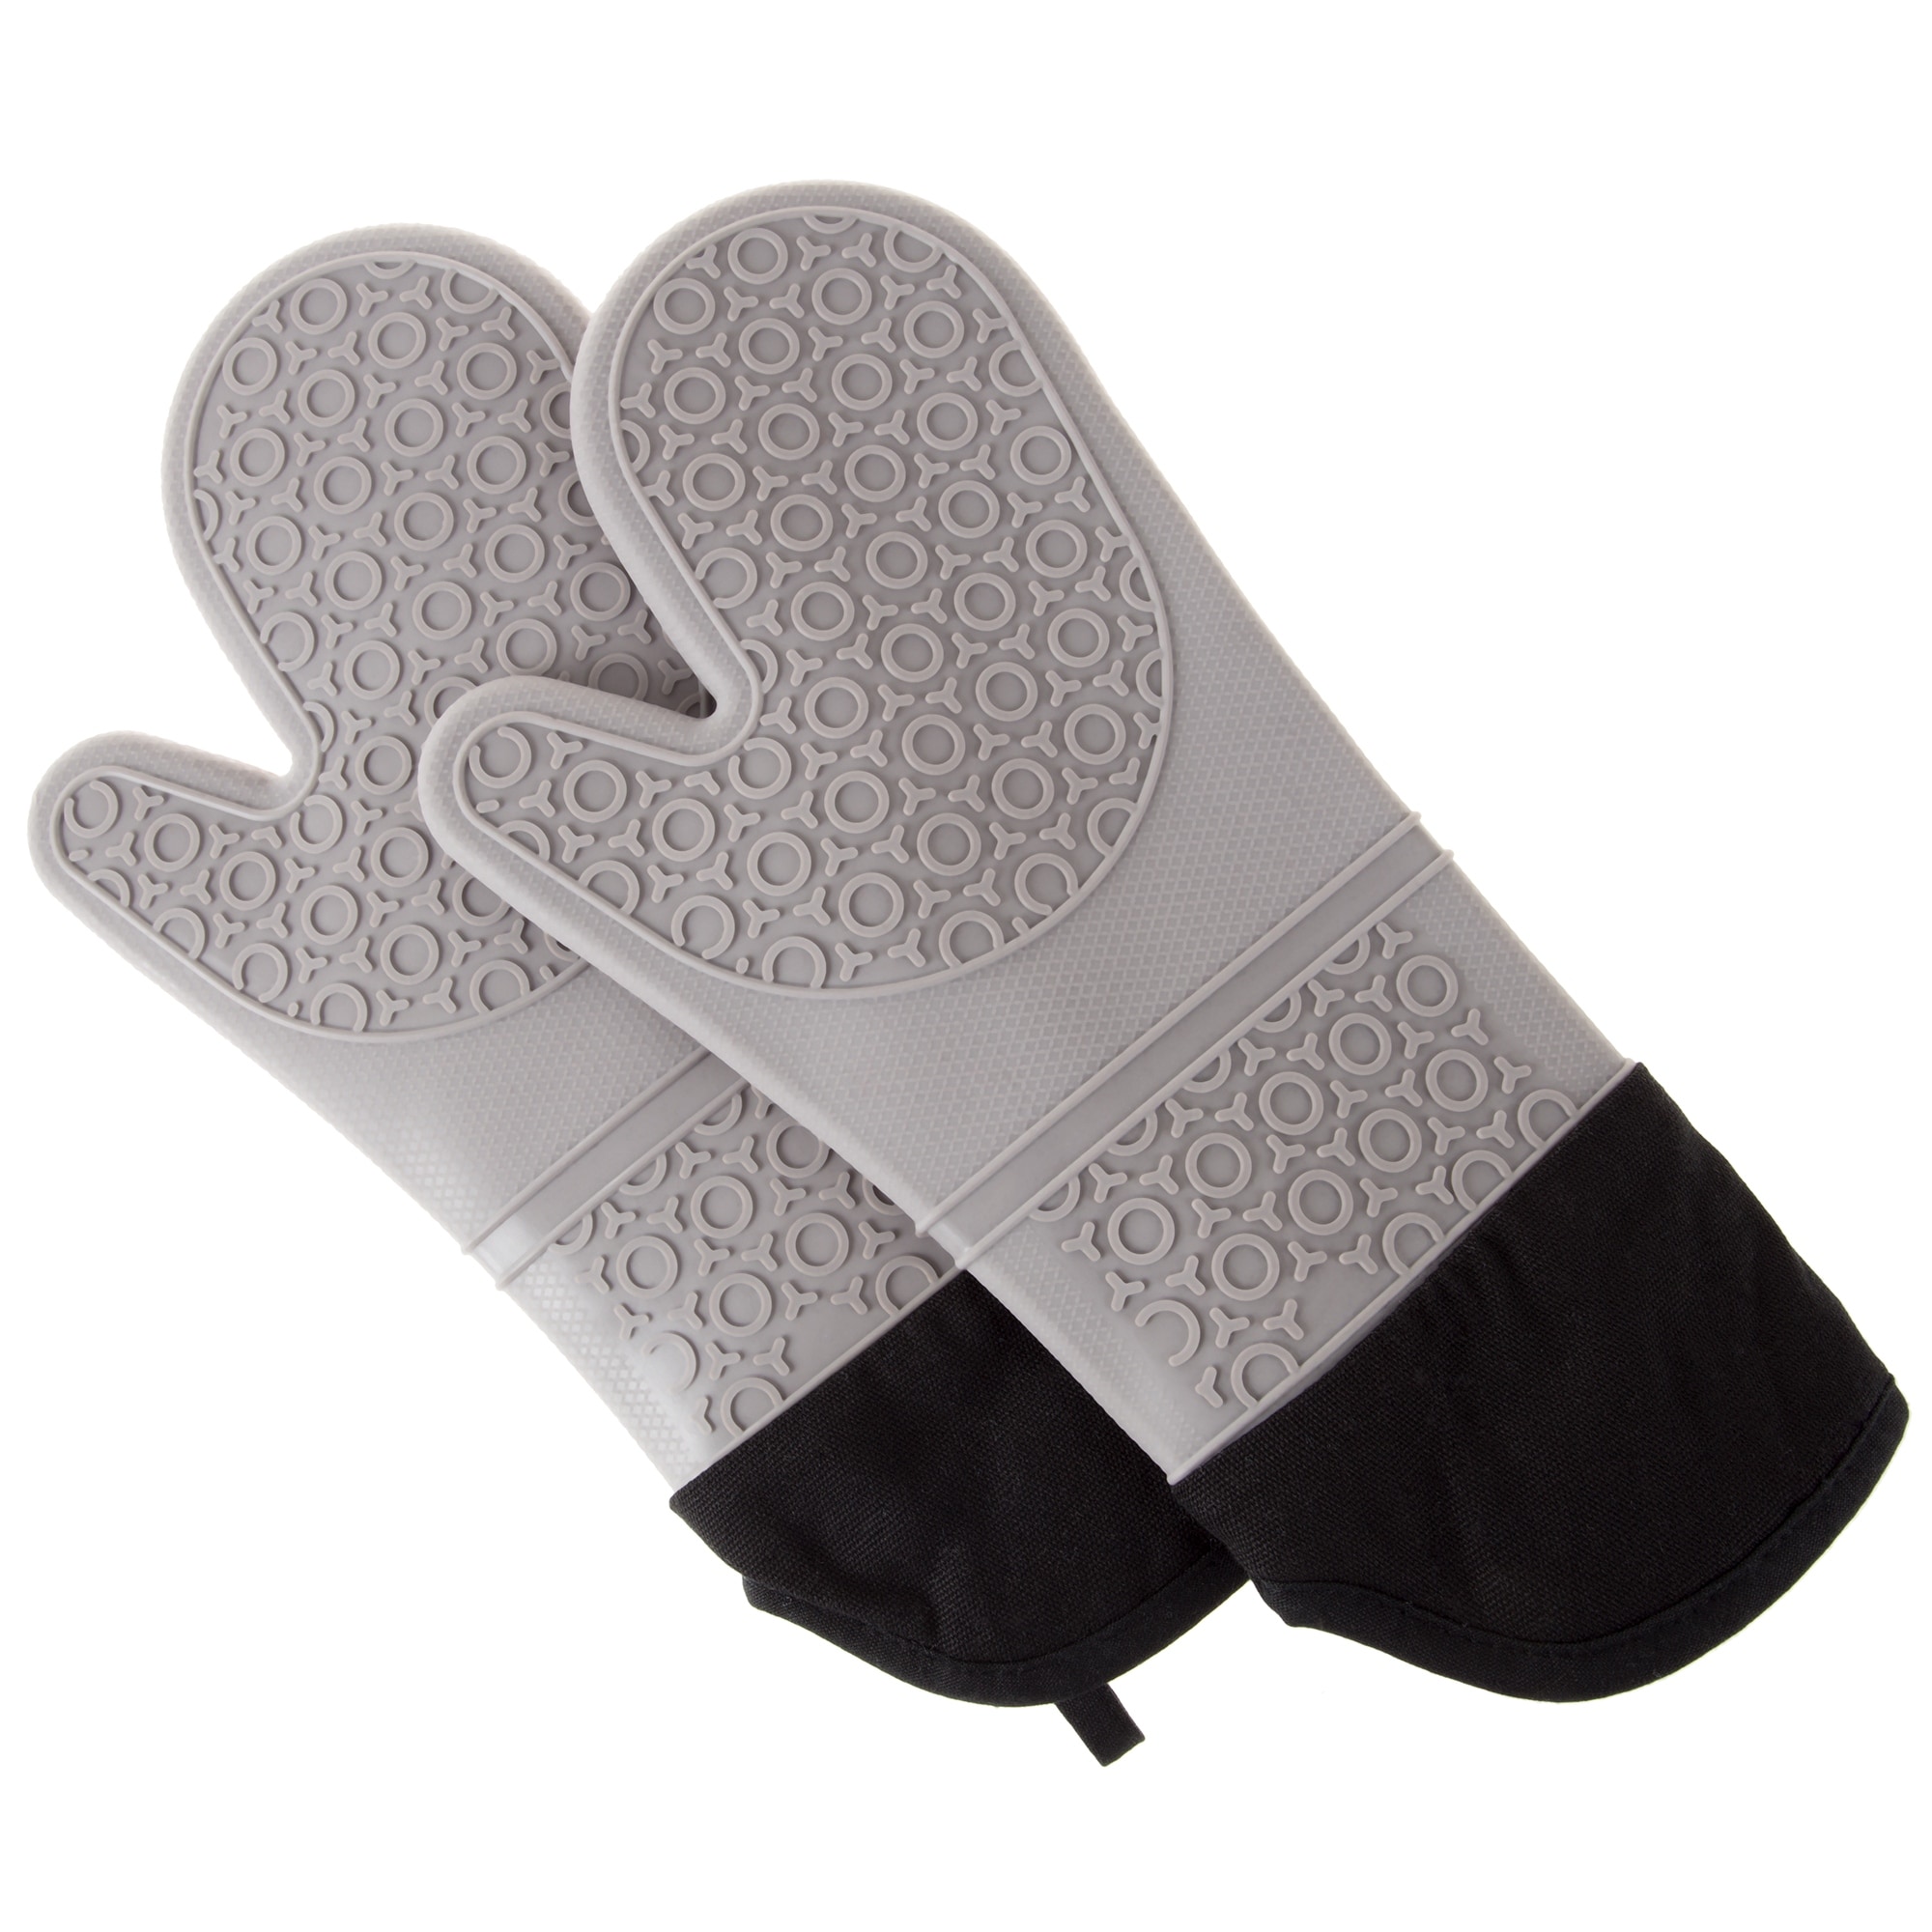 https://ak1.ostkcdn.com/images/products/is/images/direct/a269b7125060296de636ff4fb40cf4d5b9f7259a/Extra-Long-Silicone-Oven-Mitts---Heat-Resistant-and-Waterproof-Pot-Holders-with-Quilted-Lining-by-Lavish-Home-%28Gray%29.jpg